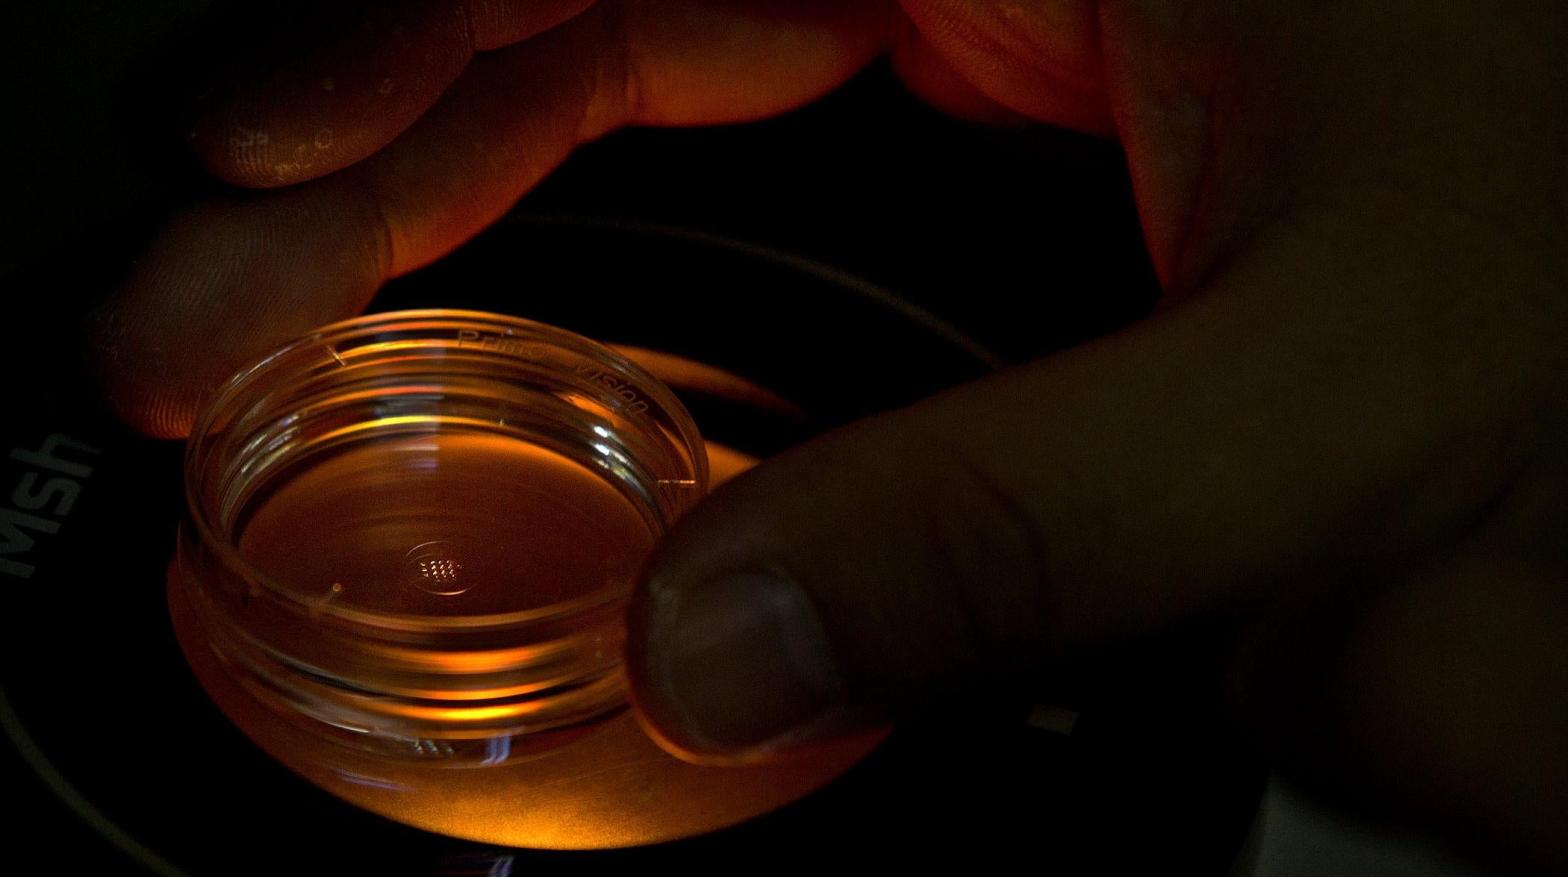 An embryologist adjusting a microplate containing embryos. (Image: Mark Schiefelbein, AP)